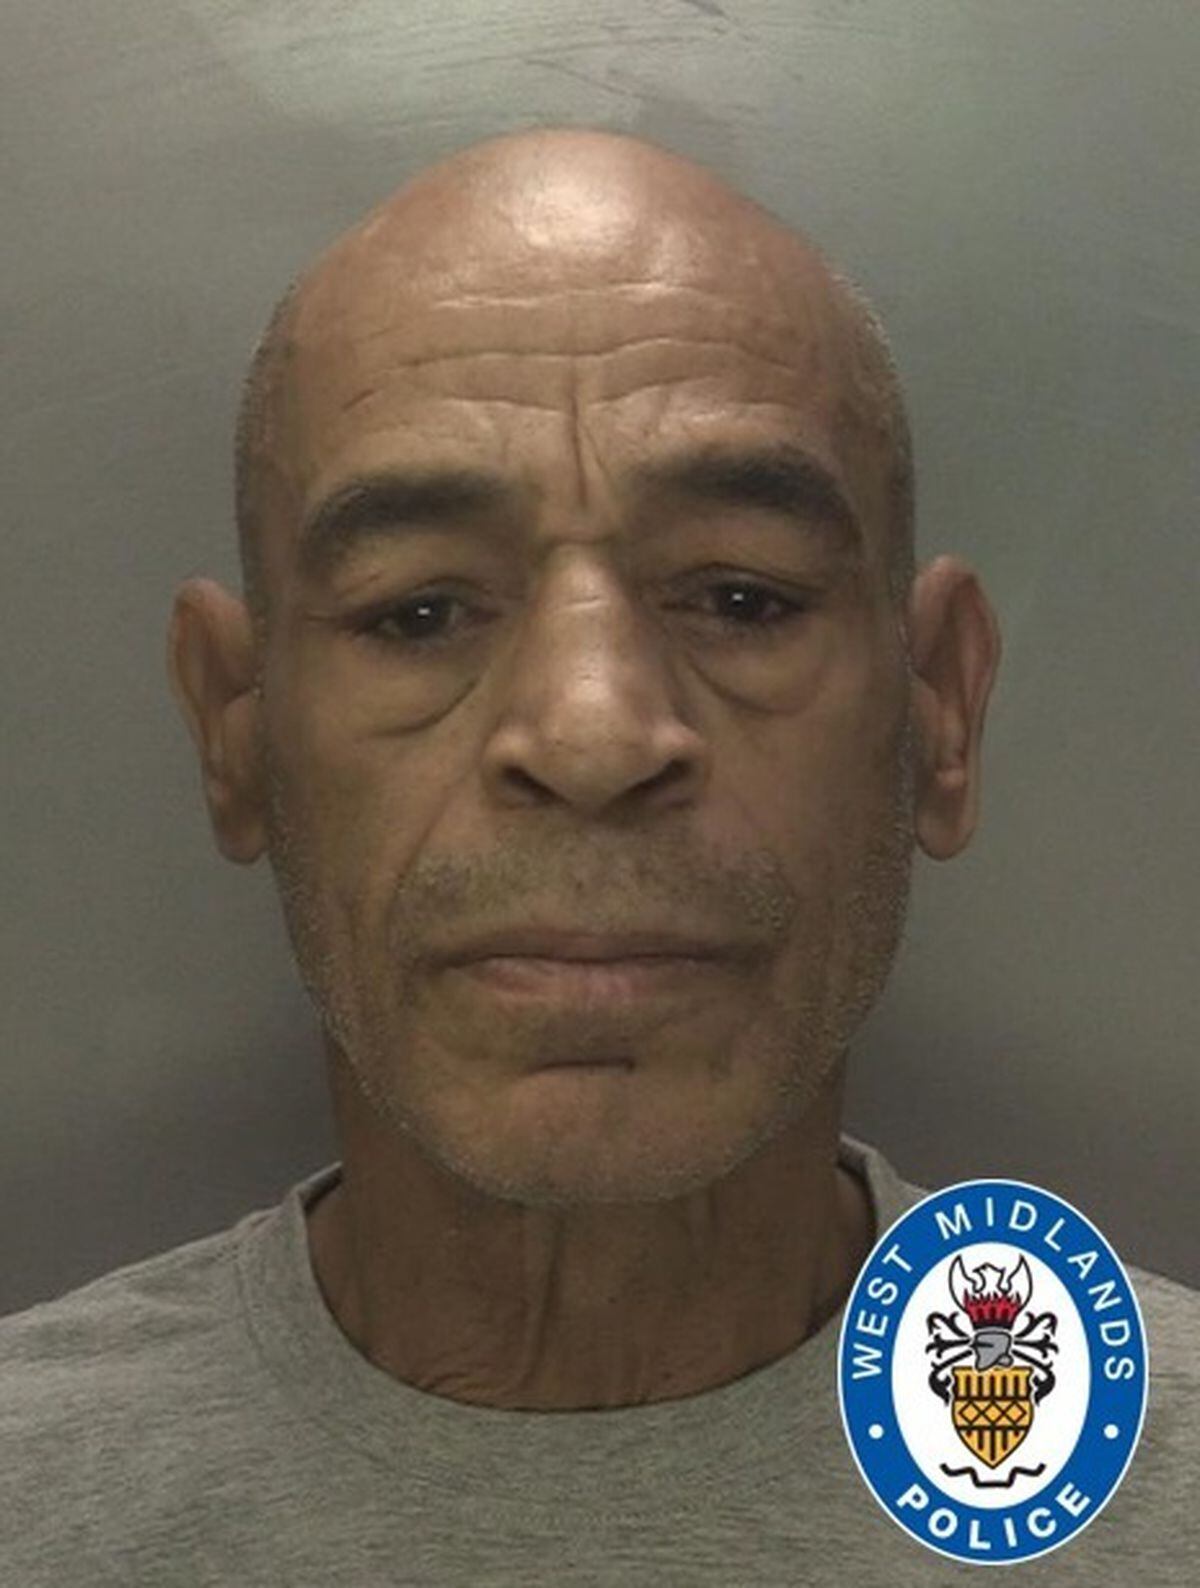 Paul Hayles has been sentenced to 10 years in prison for manslaughter.